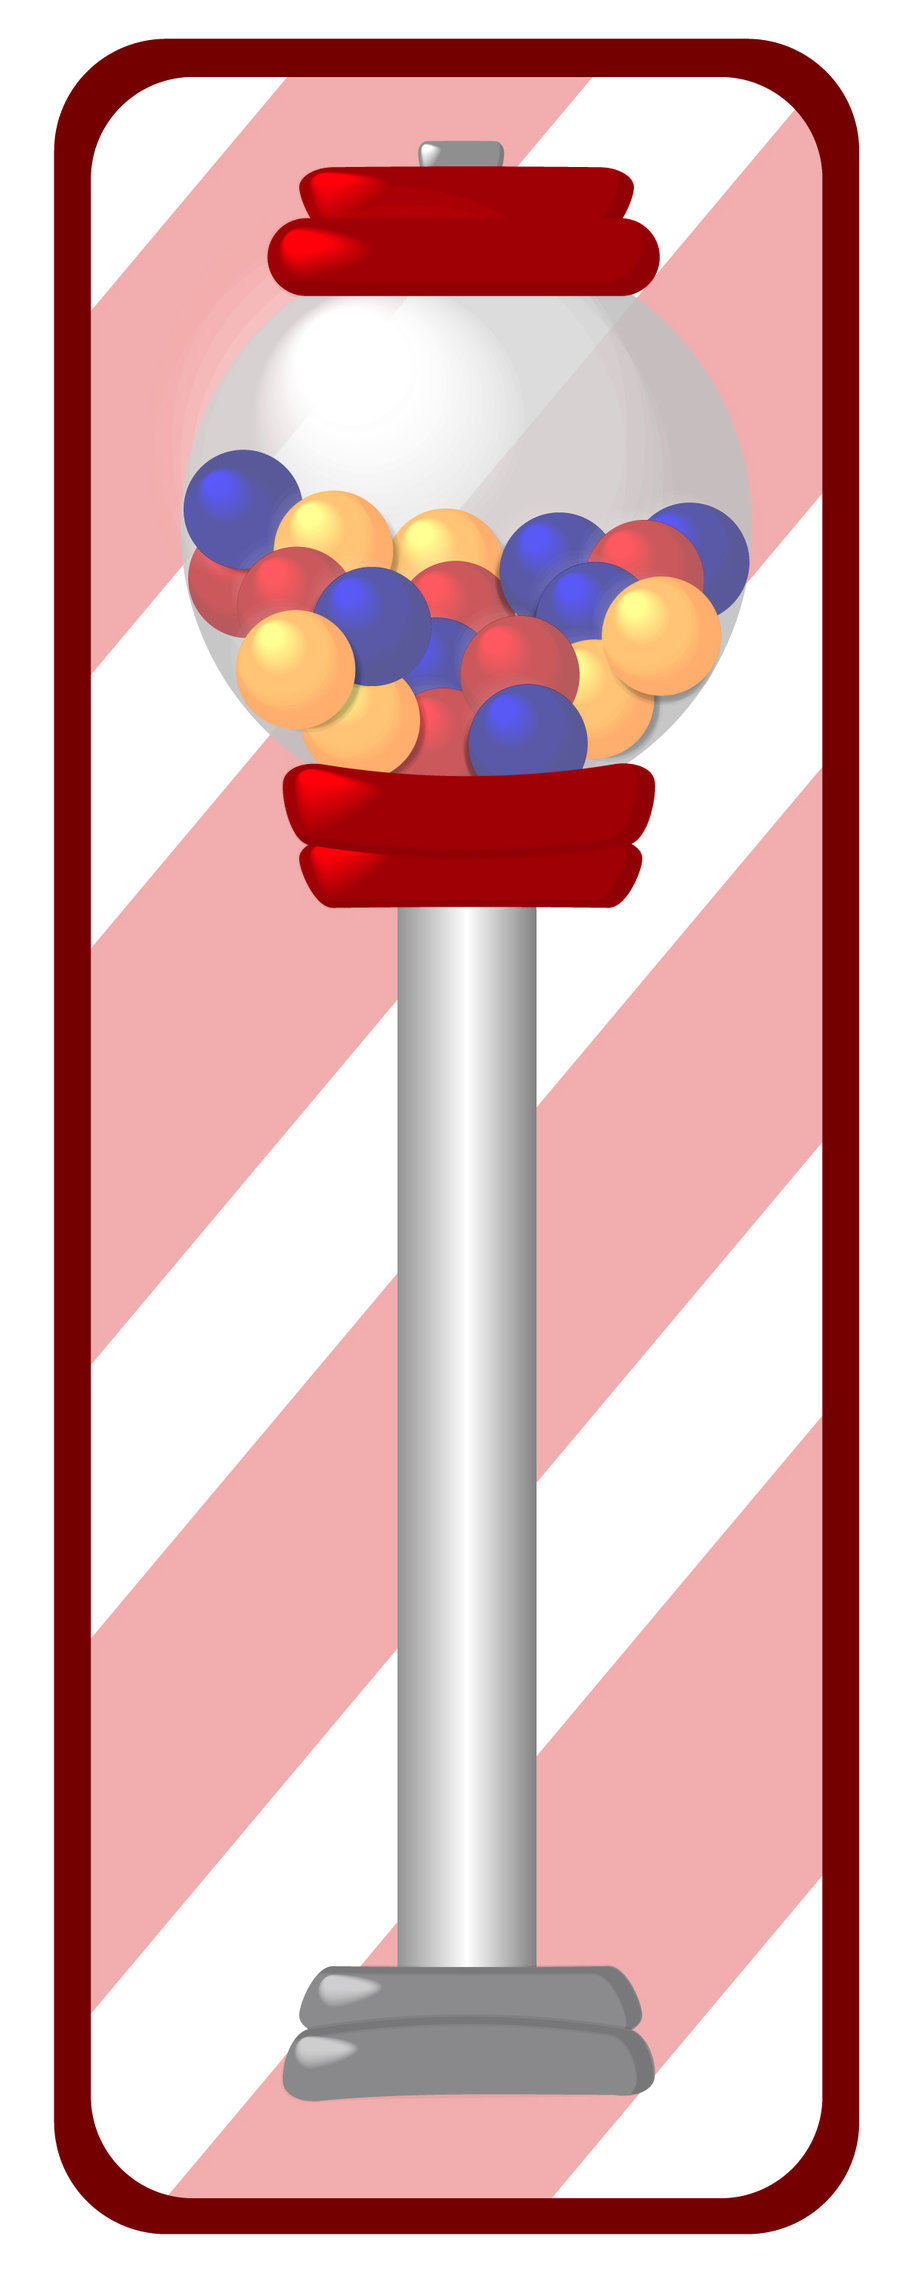 Gumball Machine Pictures | Free Download Clip Art | Free Clip Art ...